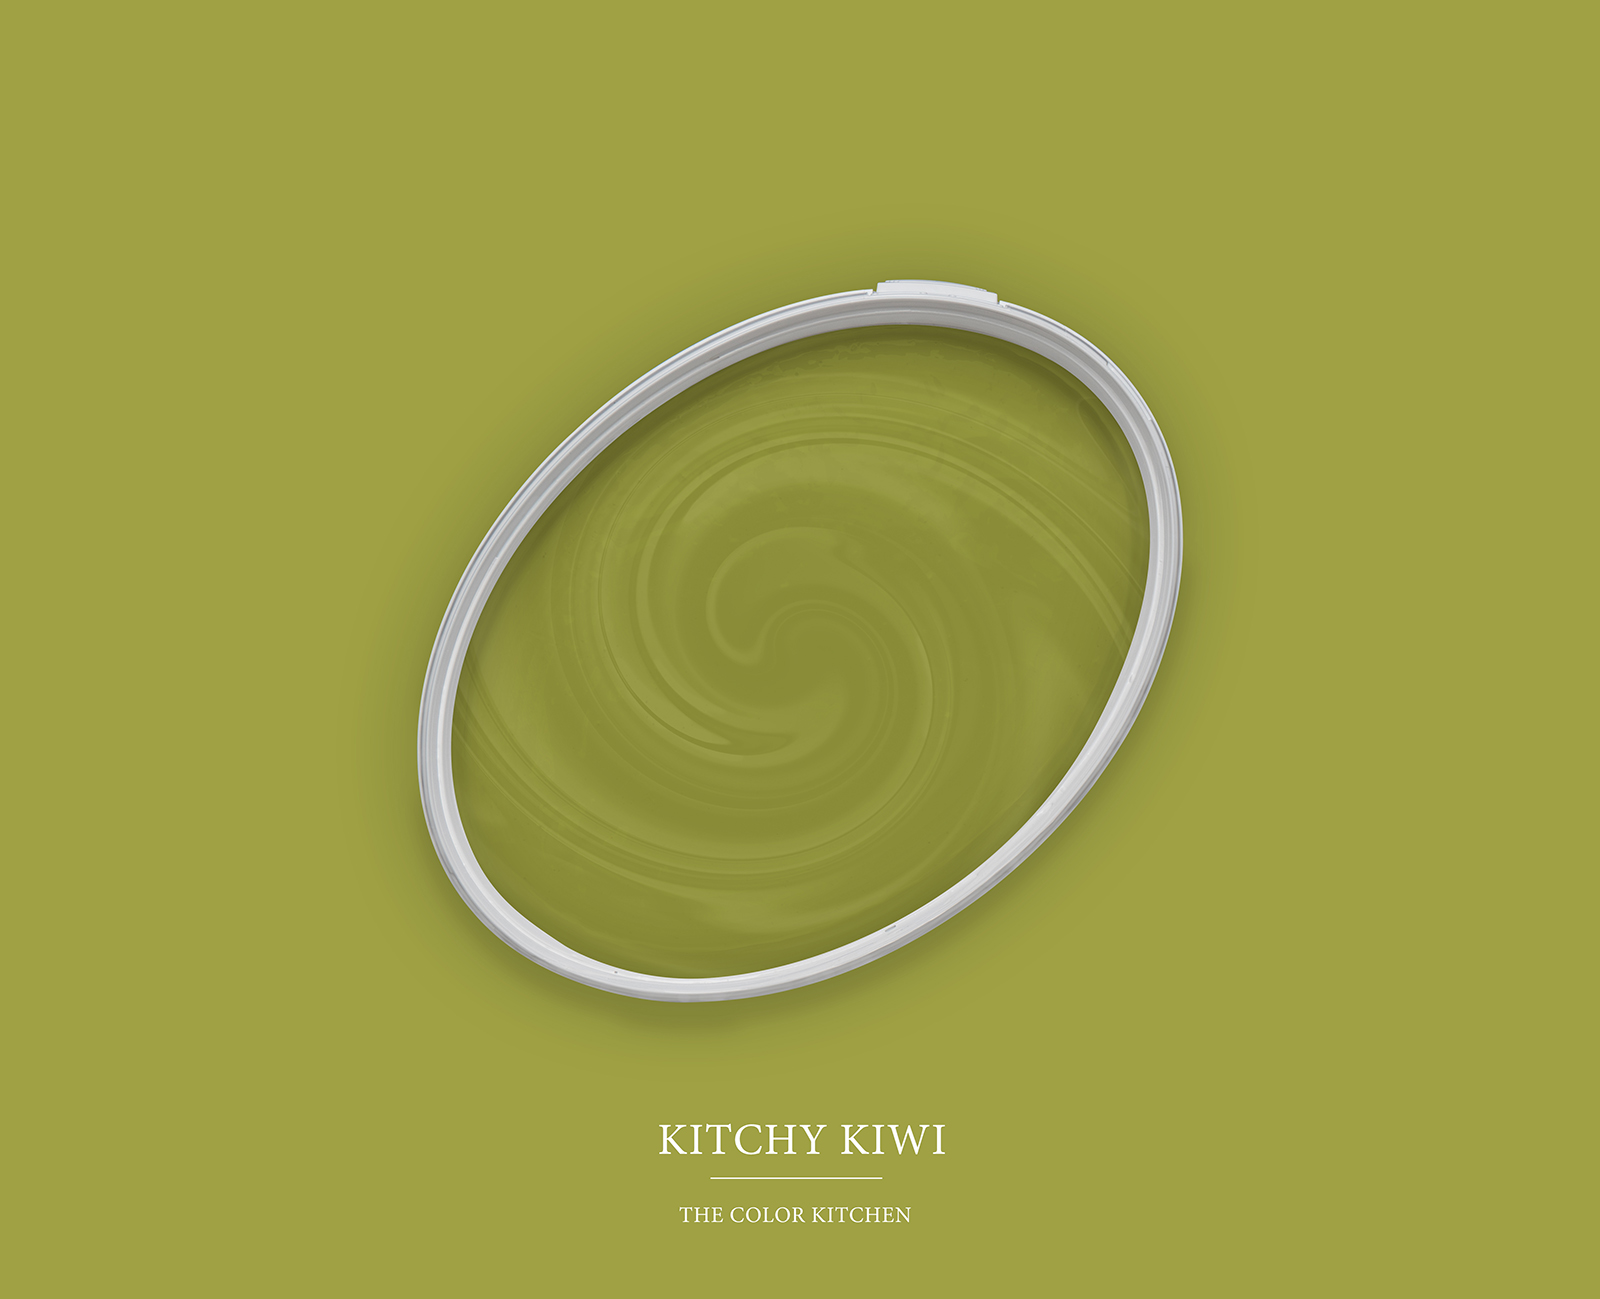         Wall Paint TCK4009 »Kitchy Kiwi« in bright yellow-green – 2.5 litre
    